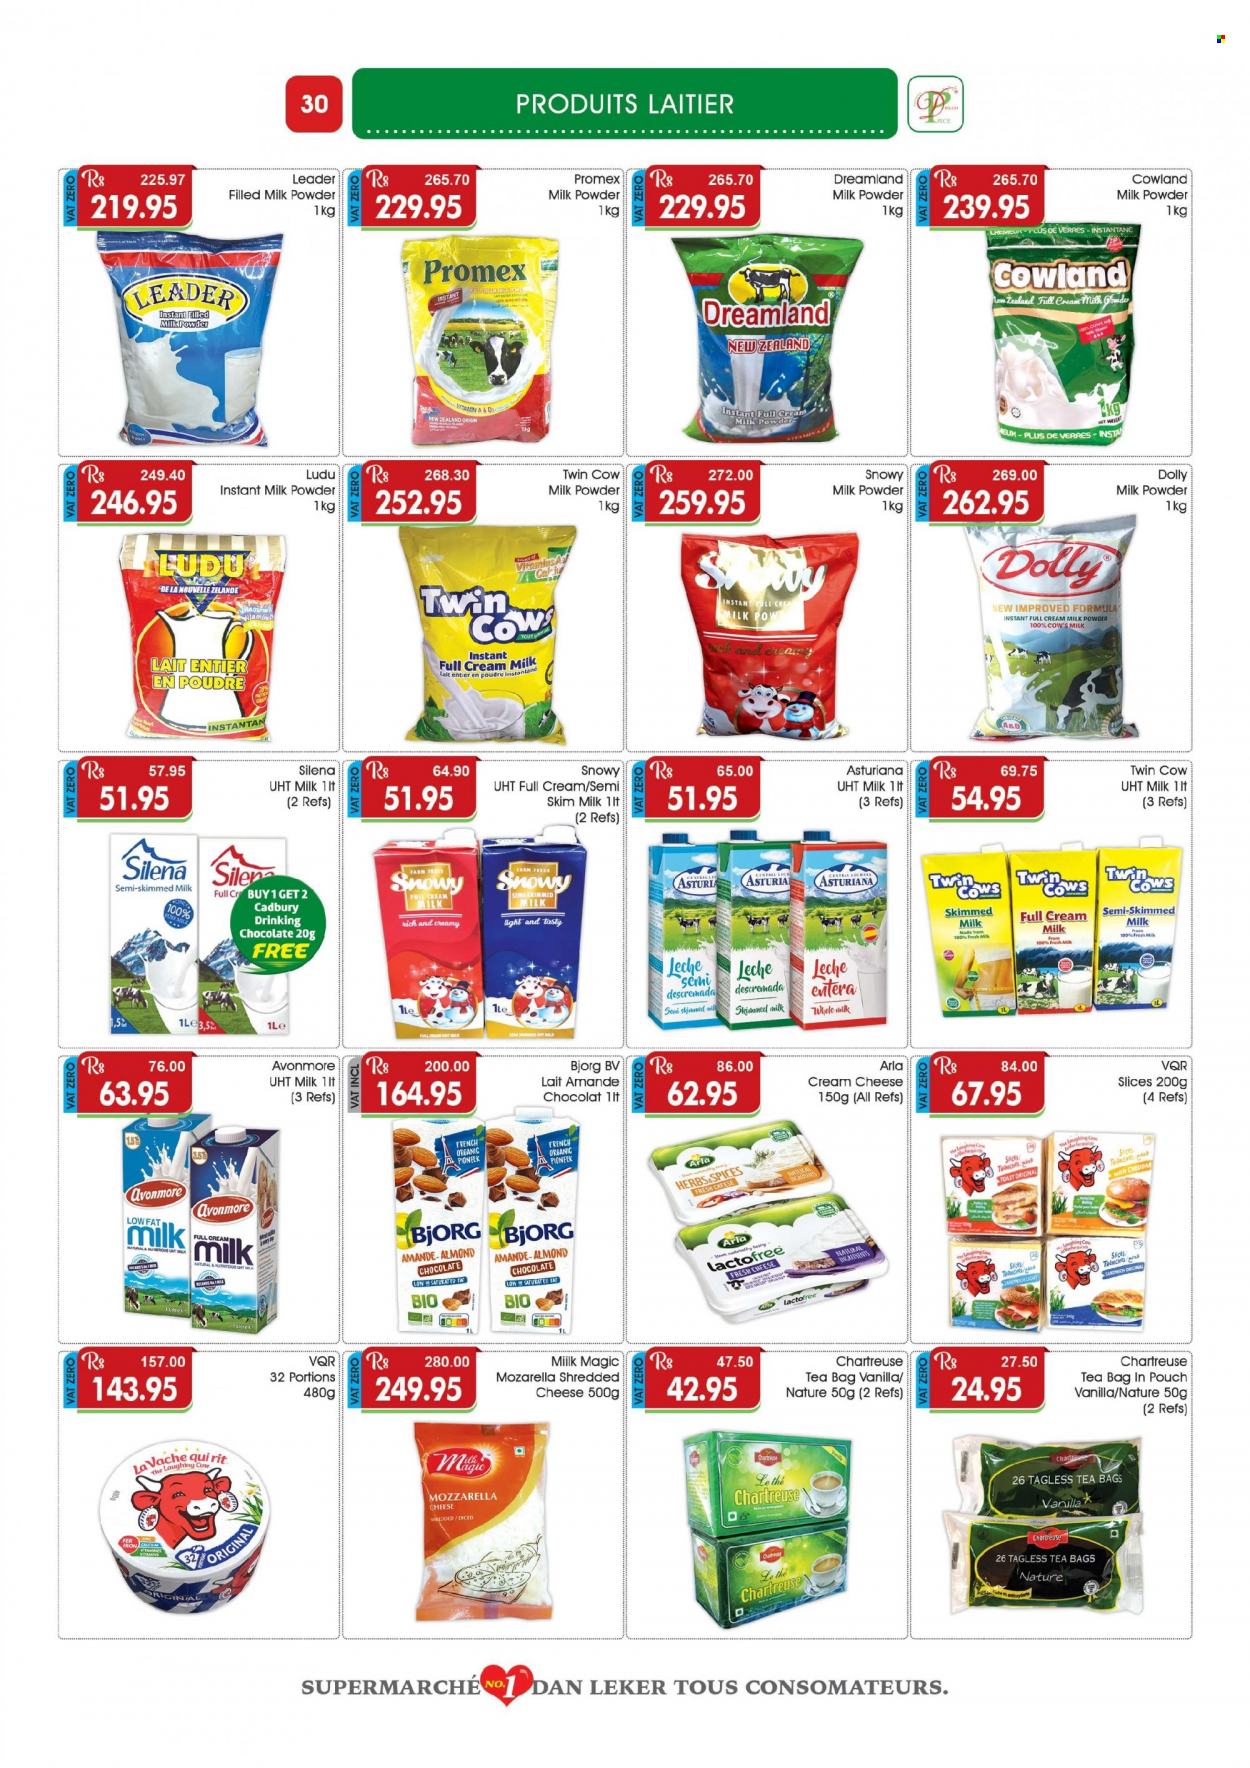 thumbnail - Dreamprice Catalogue - 21.11.2022 - 11.12.2022 - Sales products - sandwich, cream cheese, shredded cheese, The Laughing Cow, Arla, milk powder, chocolate, Cadbury, herbs, hot chocolate, tea bags, calcium, mozzarella. Page 30.